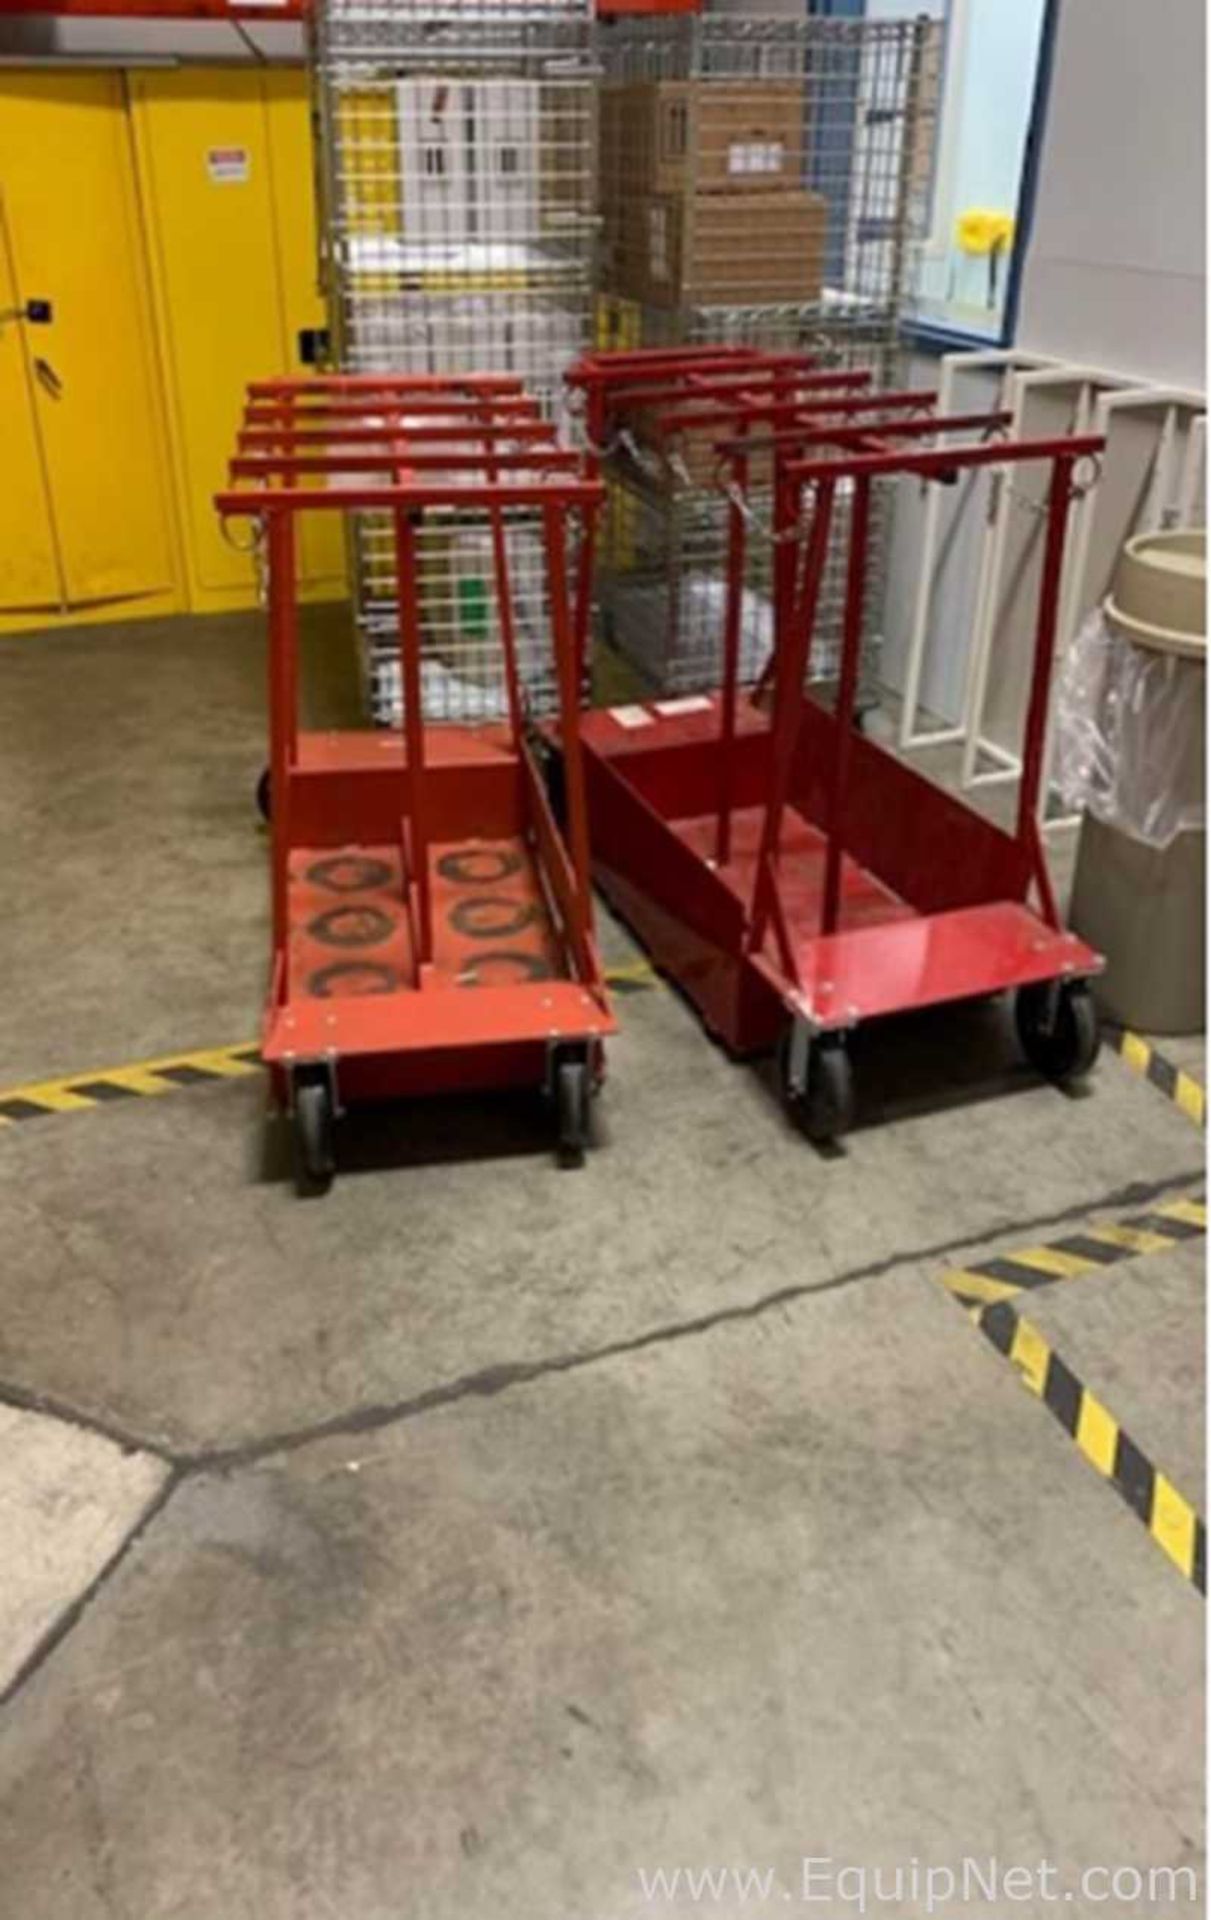 DESCRIPTION: Lot of 2 Oxygen Bottle Carts with 8 Bottle Capacity and Safety Chains EQUIPNET